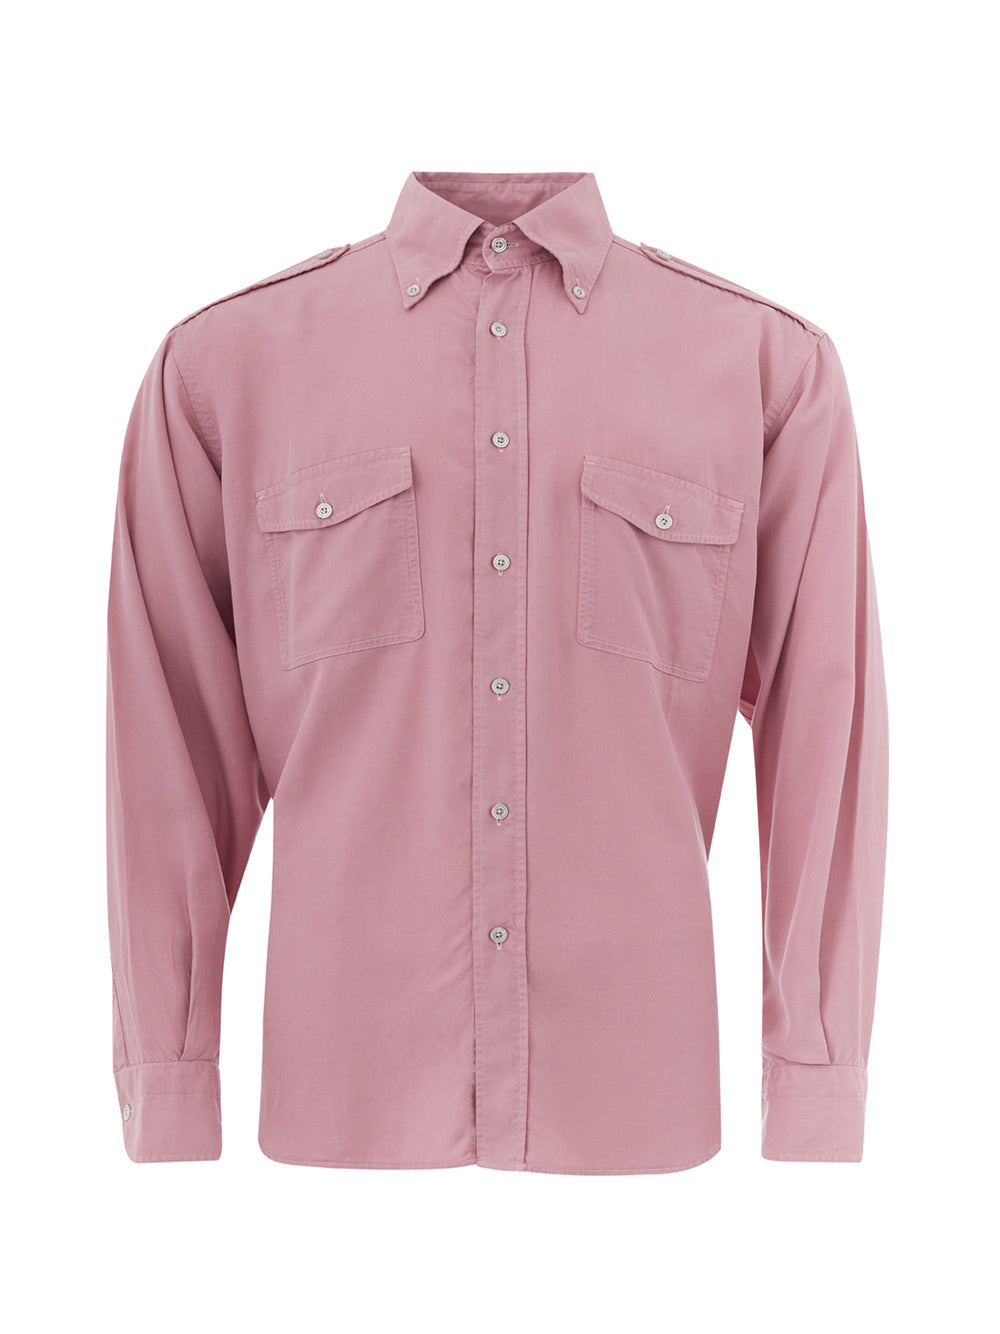 Tom Ford Military Style Shirt